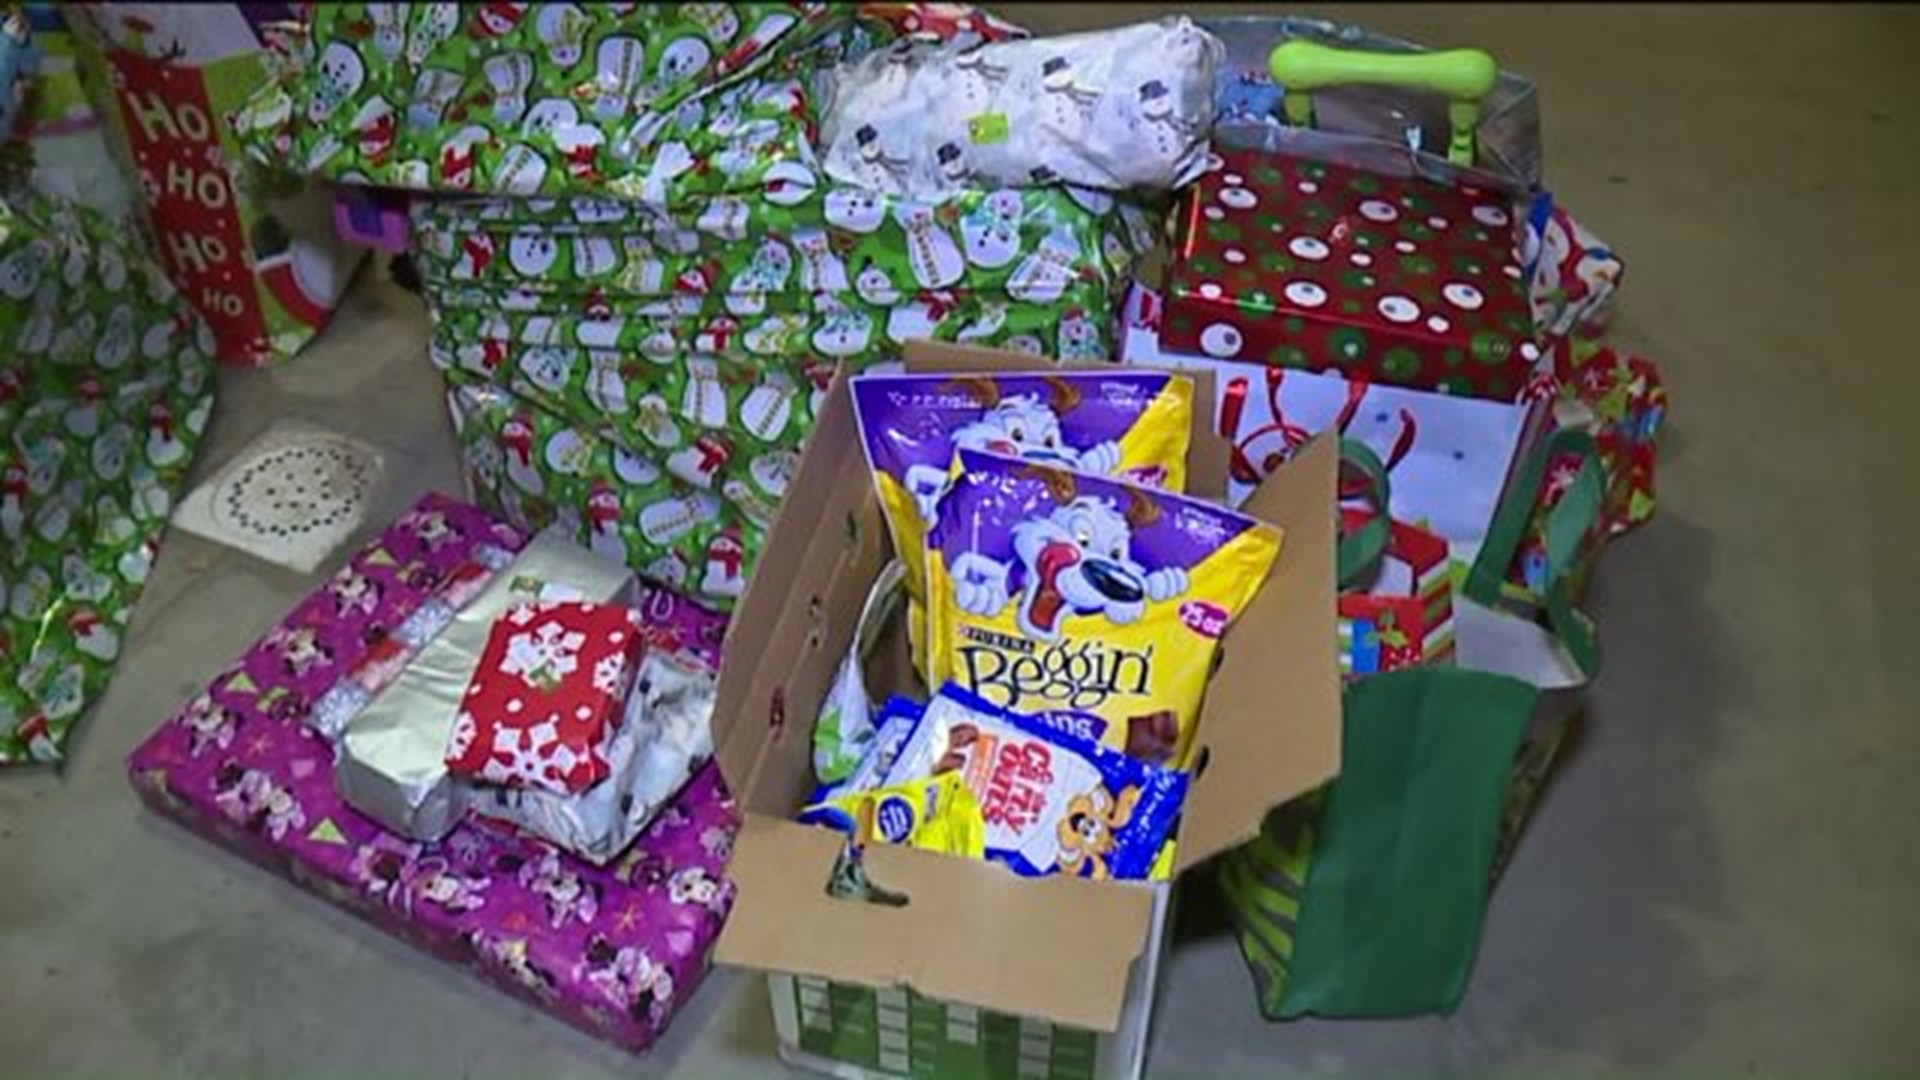 Holiday Giveaway in Schuylkill County